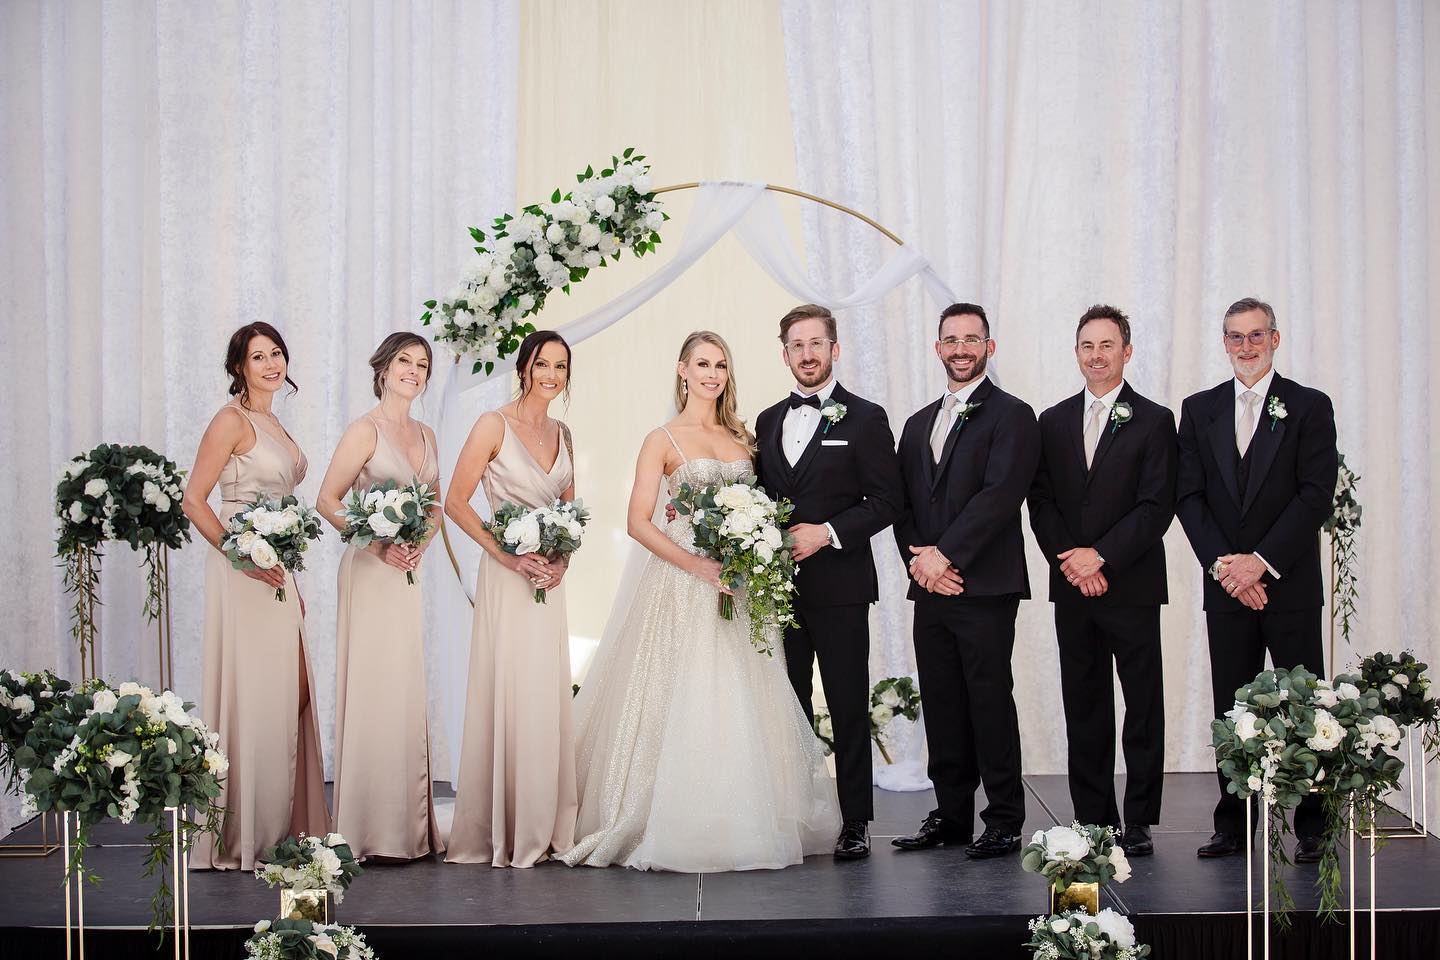 Beautiful wedding party!

#raineyartistry #nowilting #ido #nowater #petalperfection #fauxreal #foreverflorals #kcbride